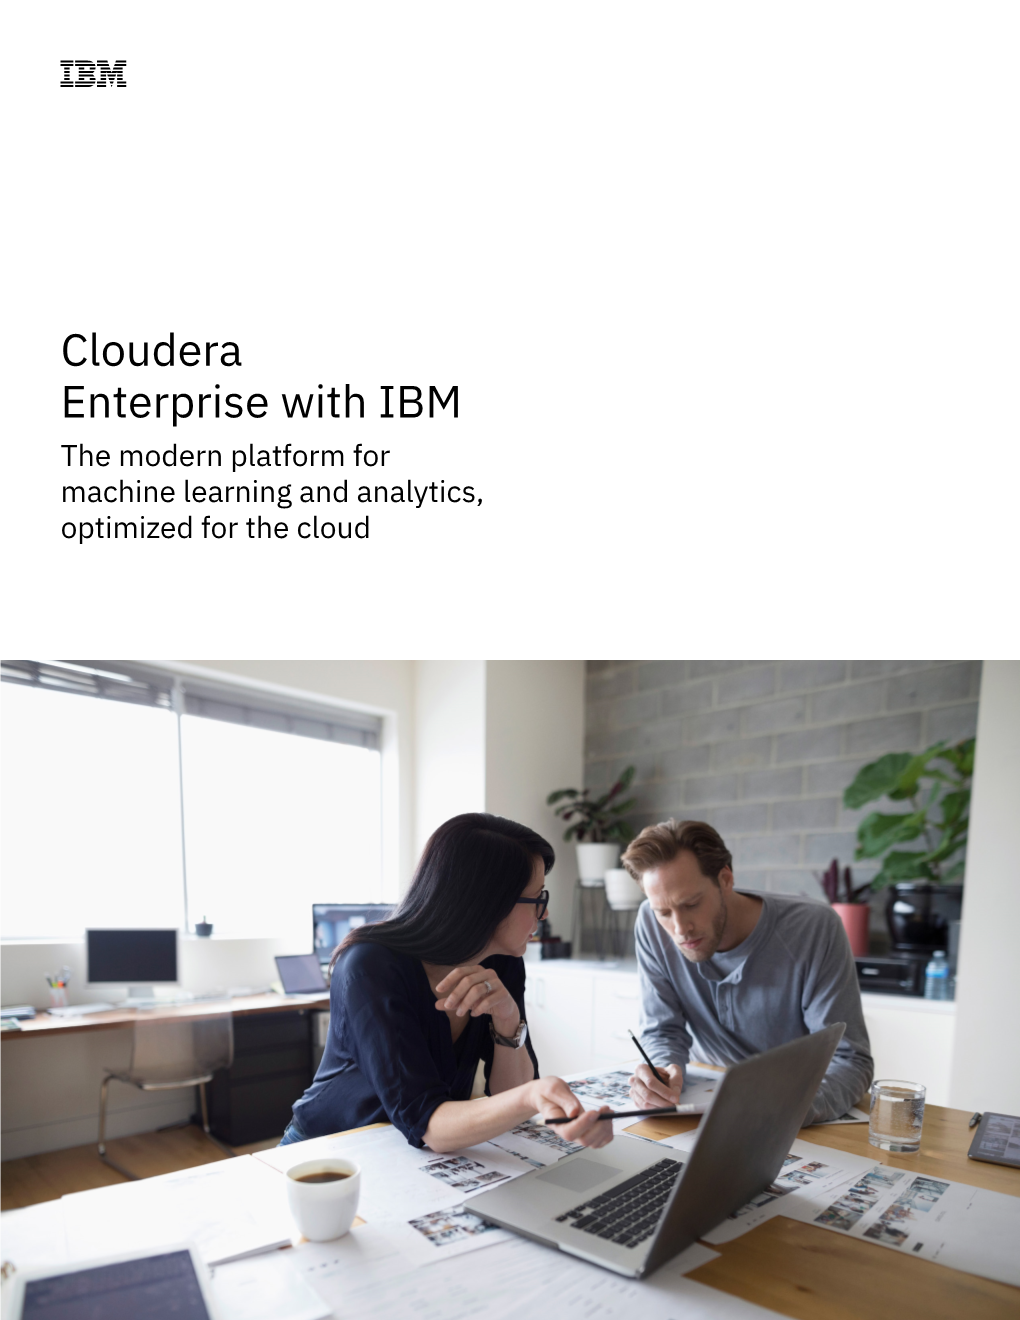 Cloudera Enterprise with IBM the Modern Platform for Machine Learning and Analytics, Optimized for the Cloud One Platform